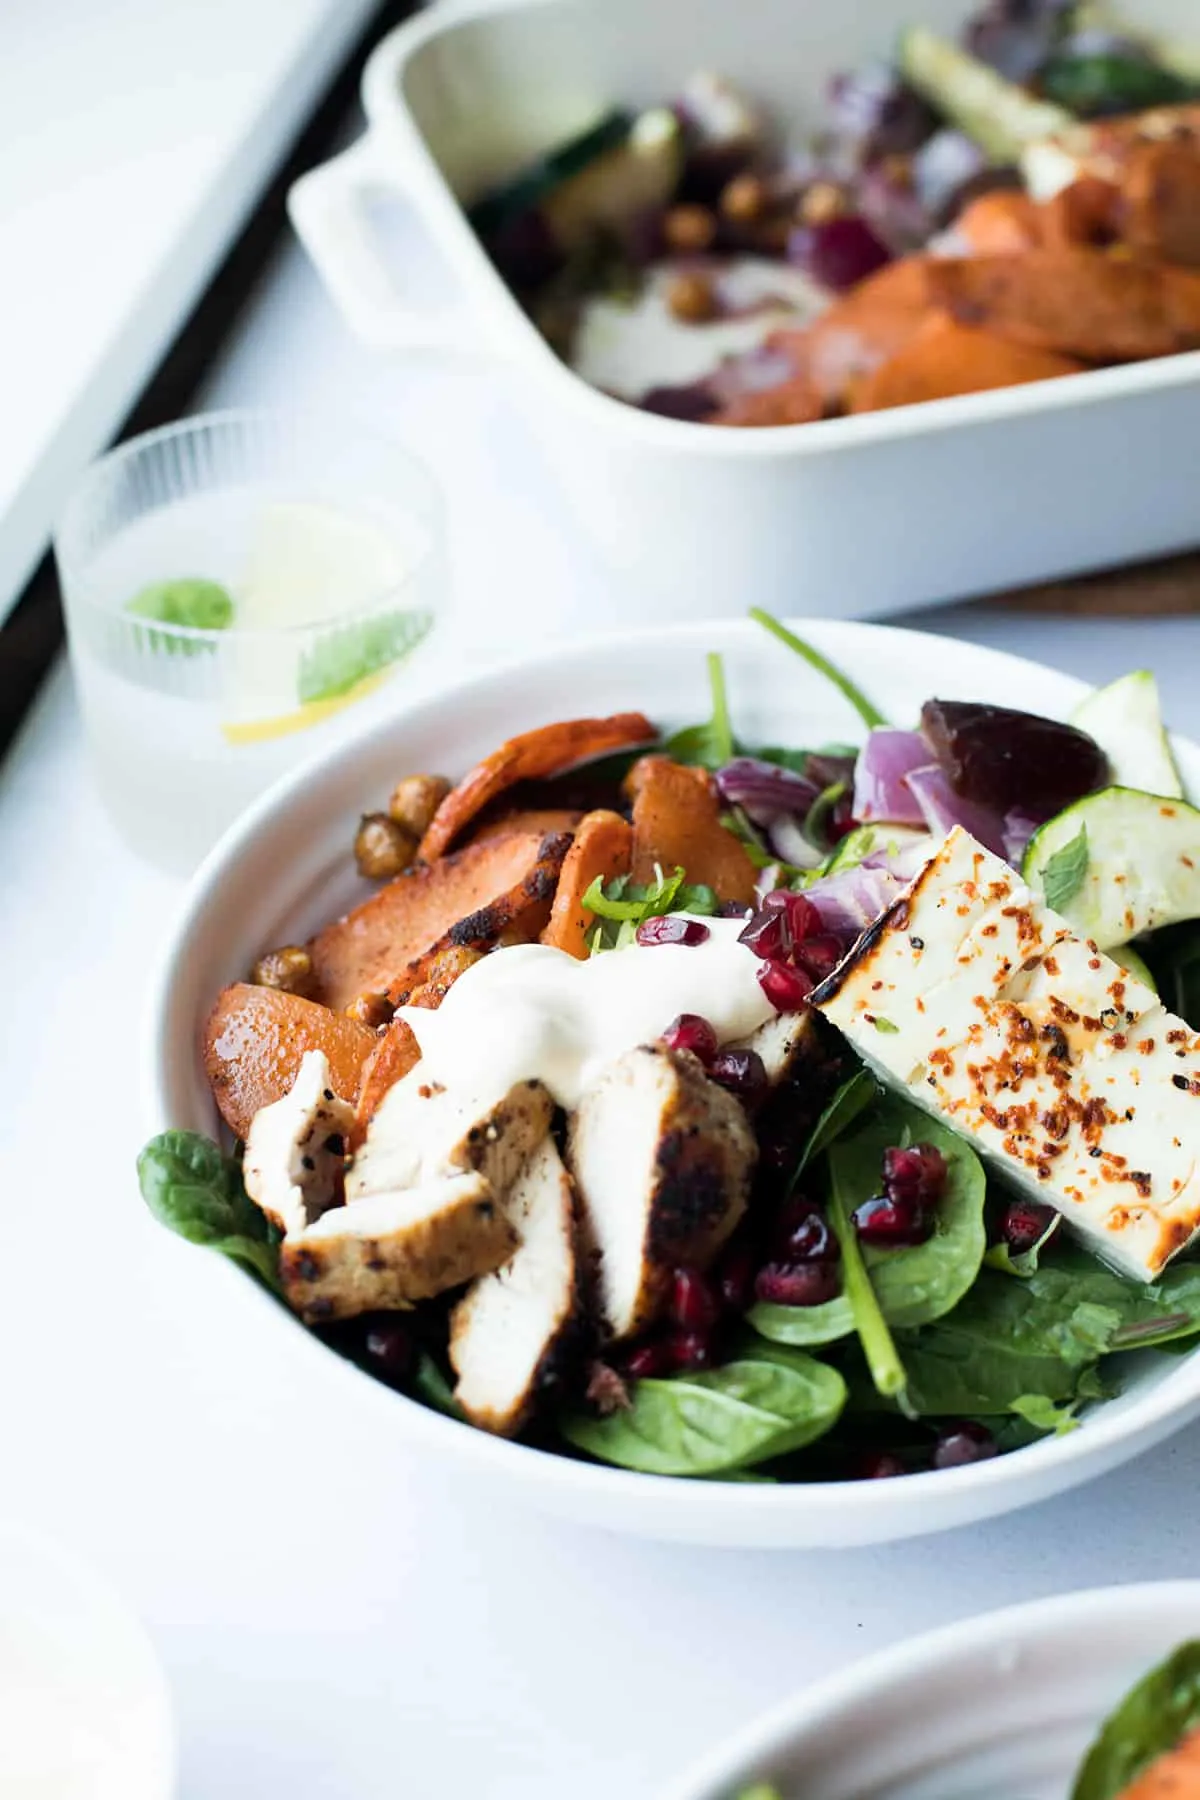 White bowl with salad, chicken, sweet potato and baked feta cheese. Casserole in the background.